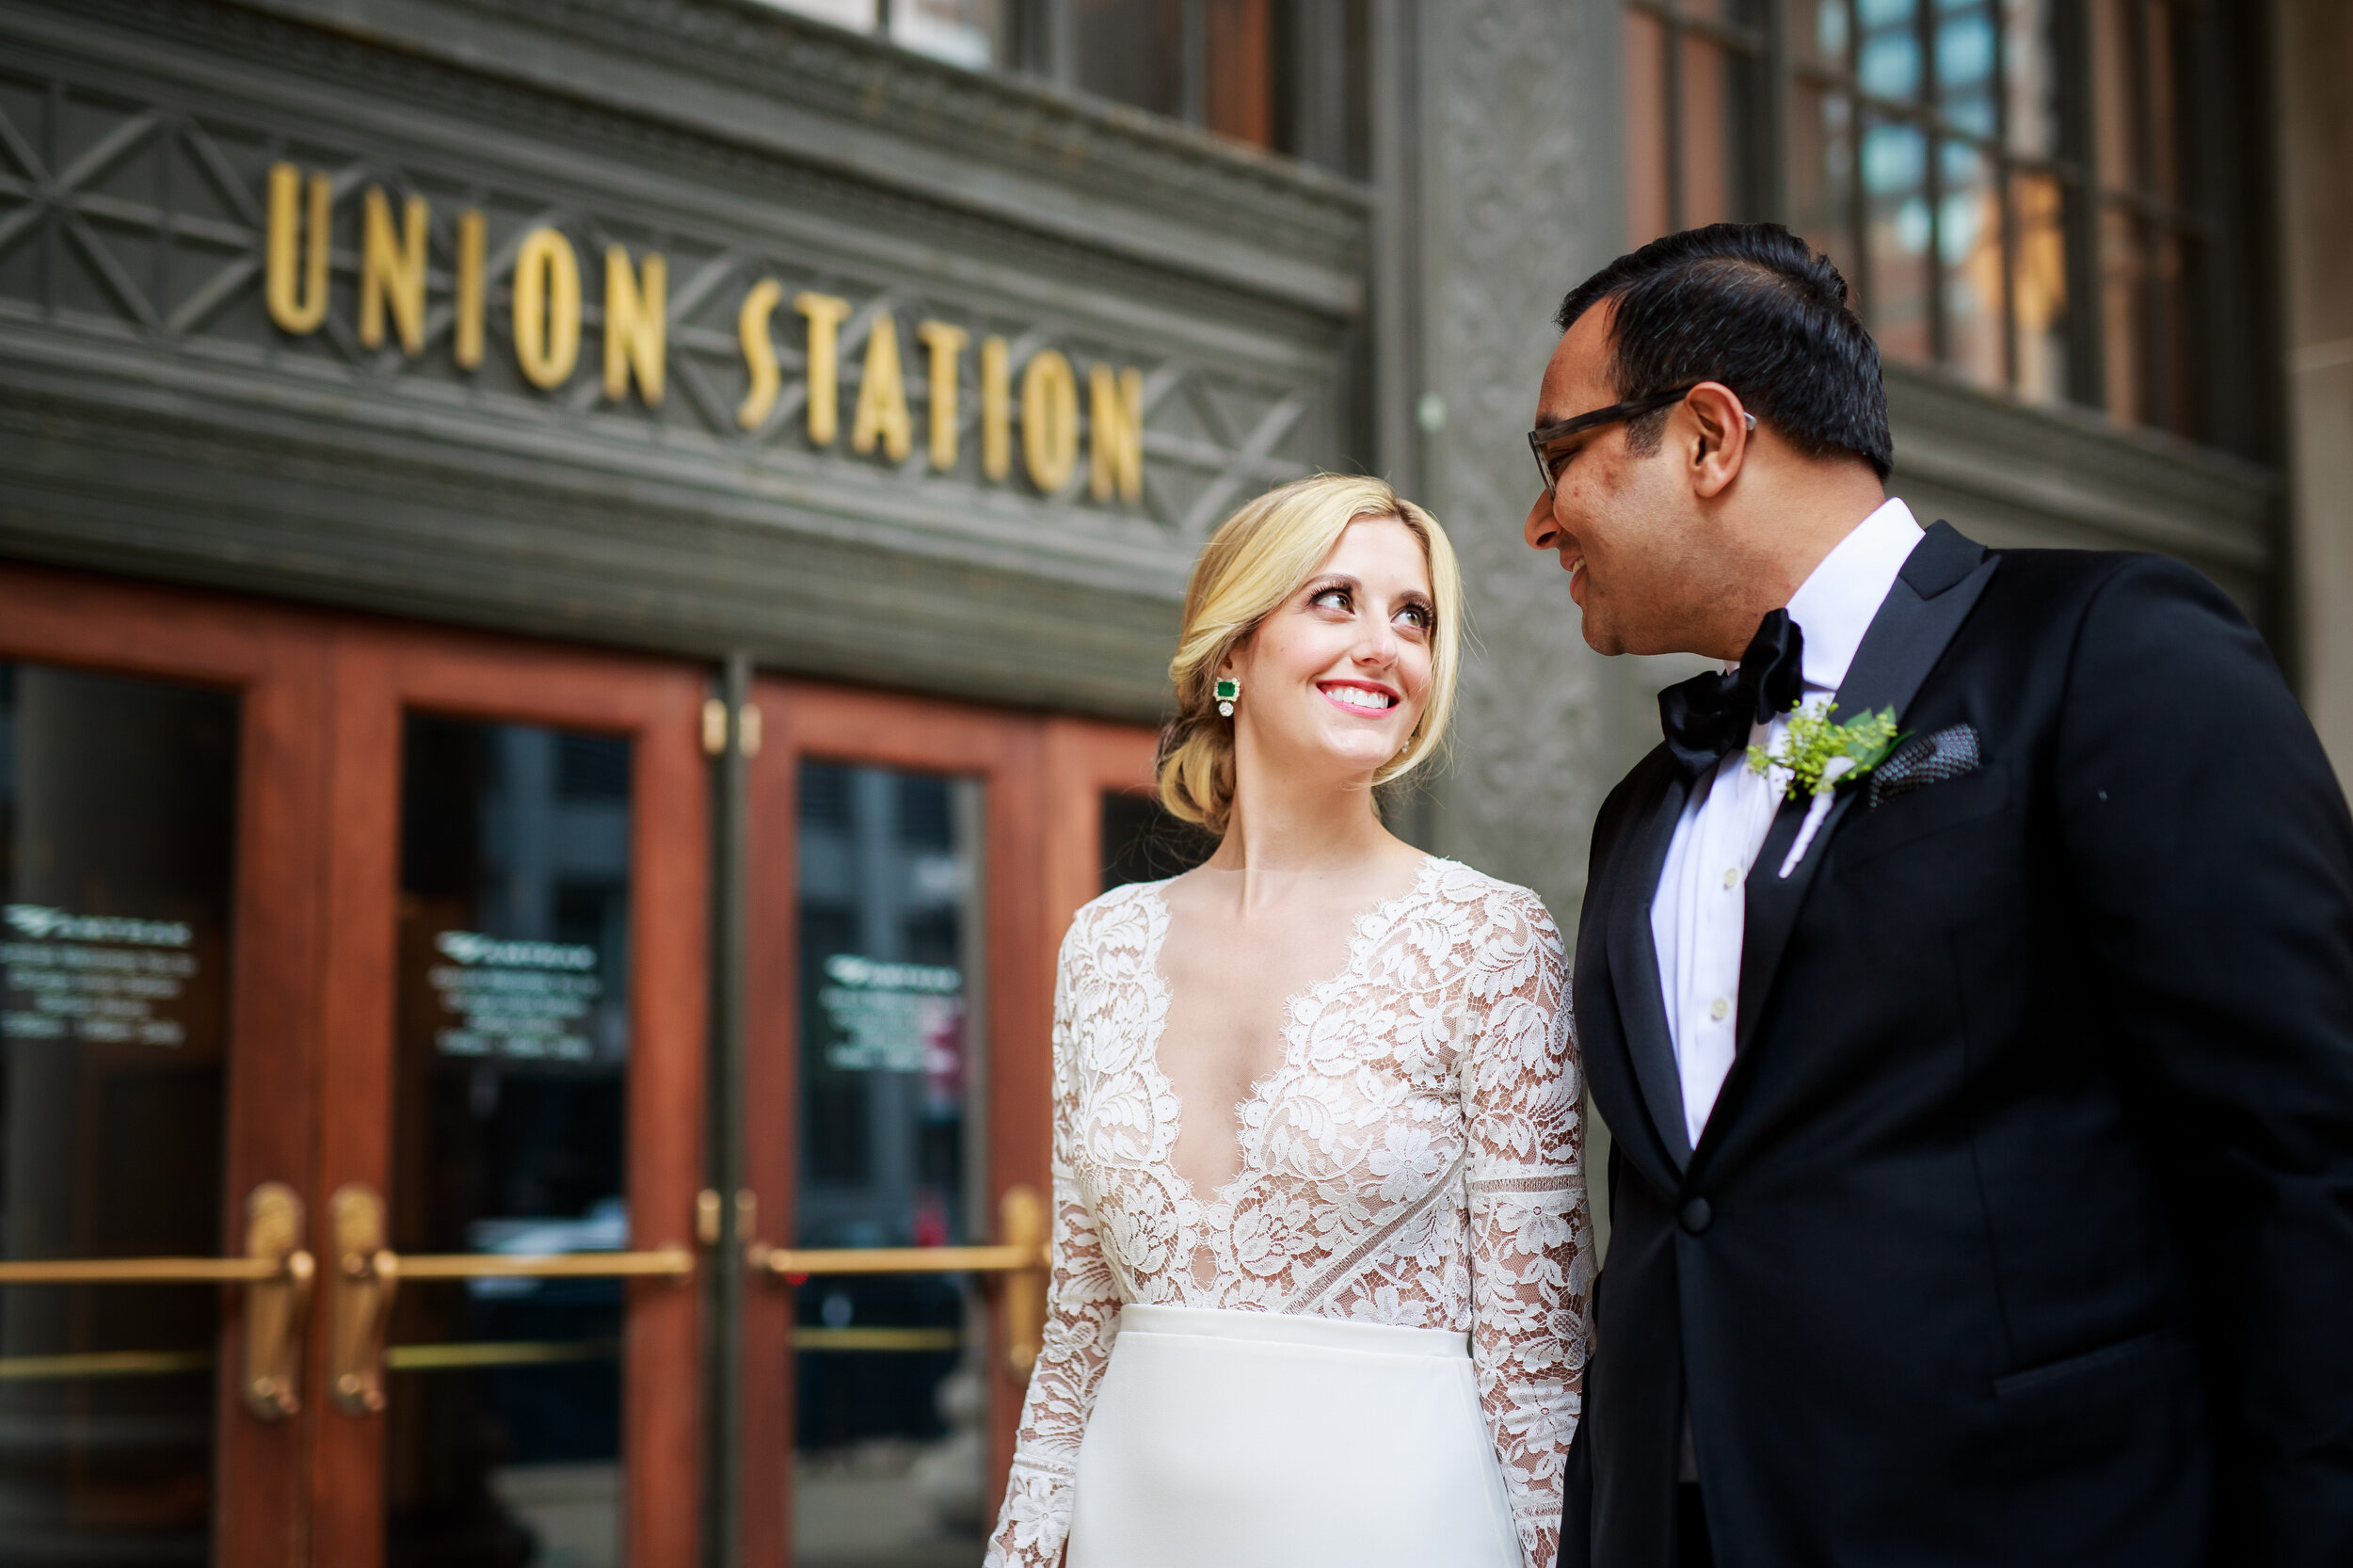 Wedding photo outside Chicago Union Station: Geraghty Chicago wedding photography captured by J. Brown Photography.